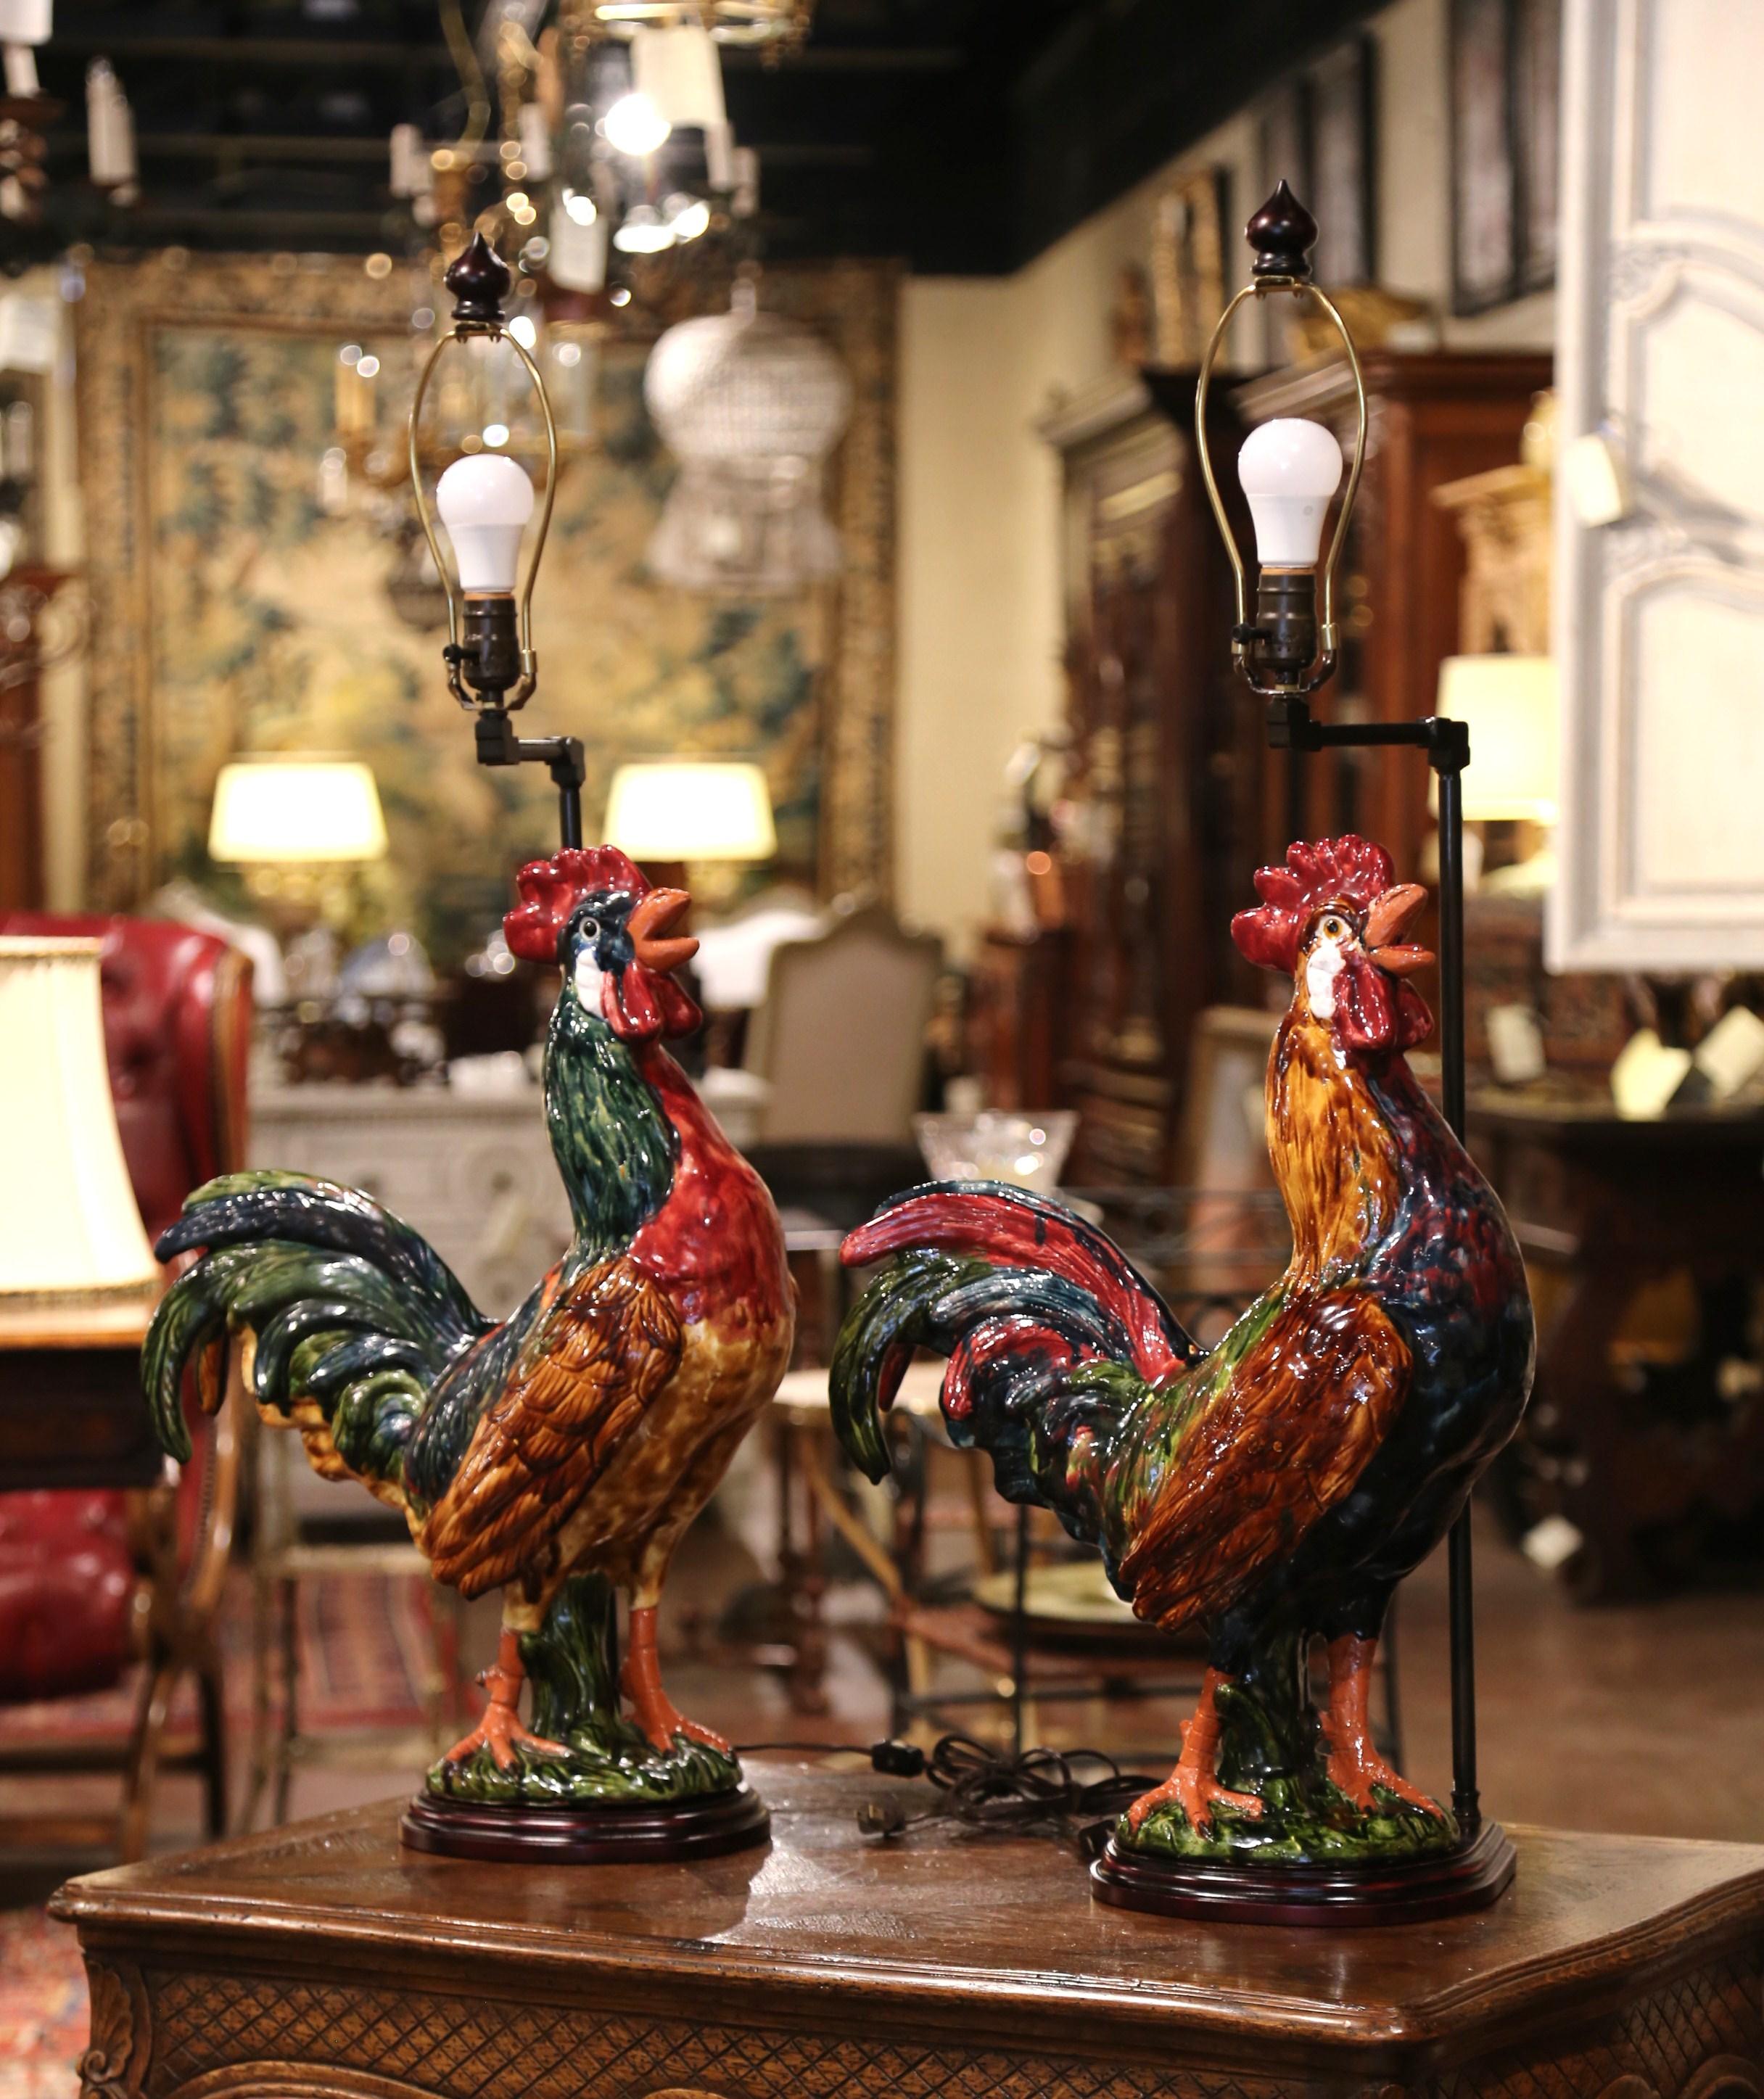 Bring a little country French flair into your home with this colorful pair of lamps. Crafted in Normandy, France, the Majolica roosters are hand painted and have been made into large table lamps. Each fixture stands on a wooden base, has new wiring